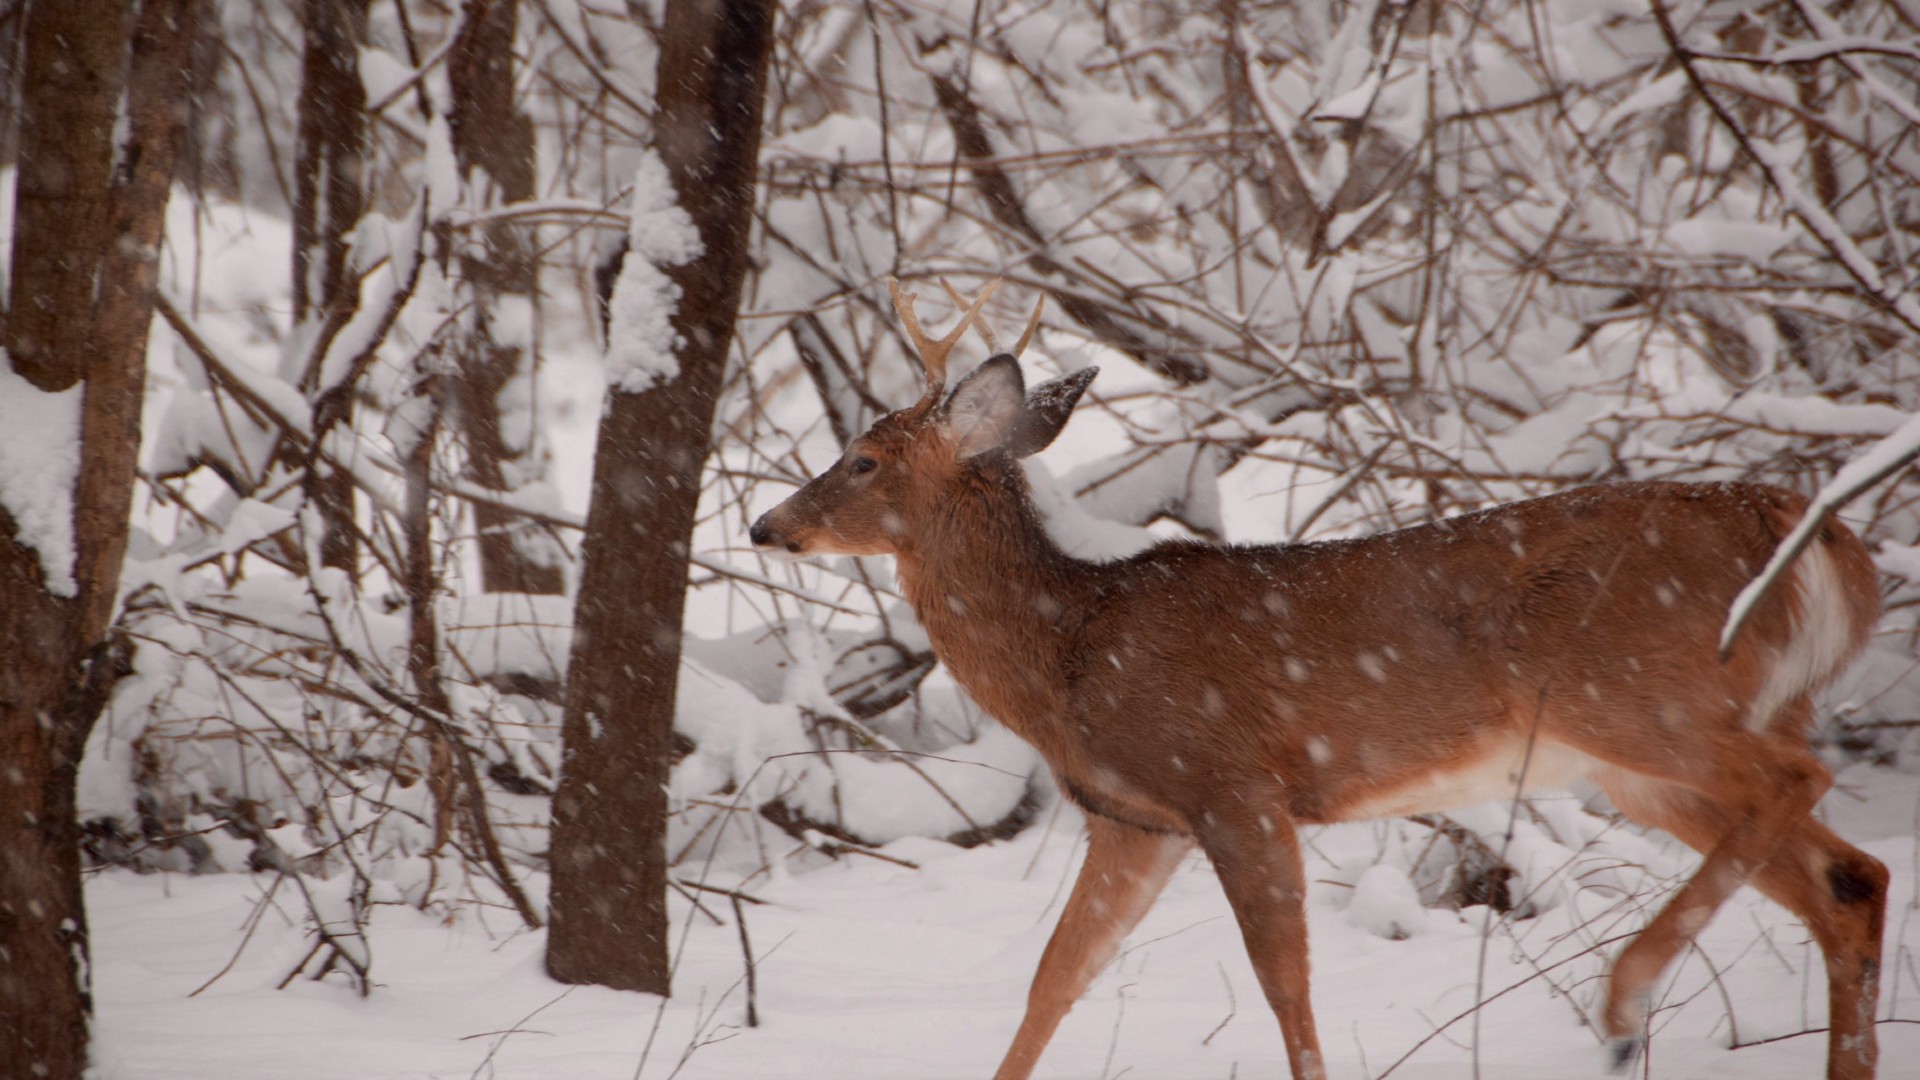 A deer is caught walking through the forest in the snow